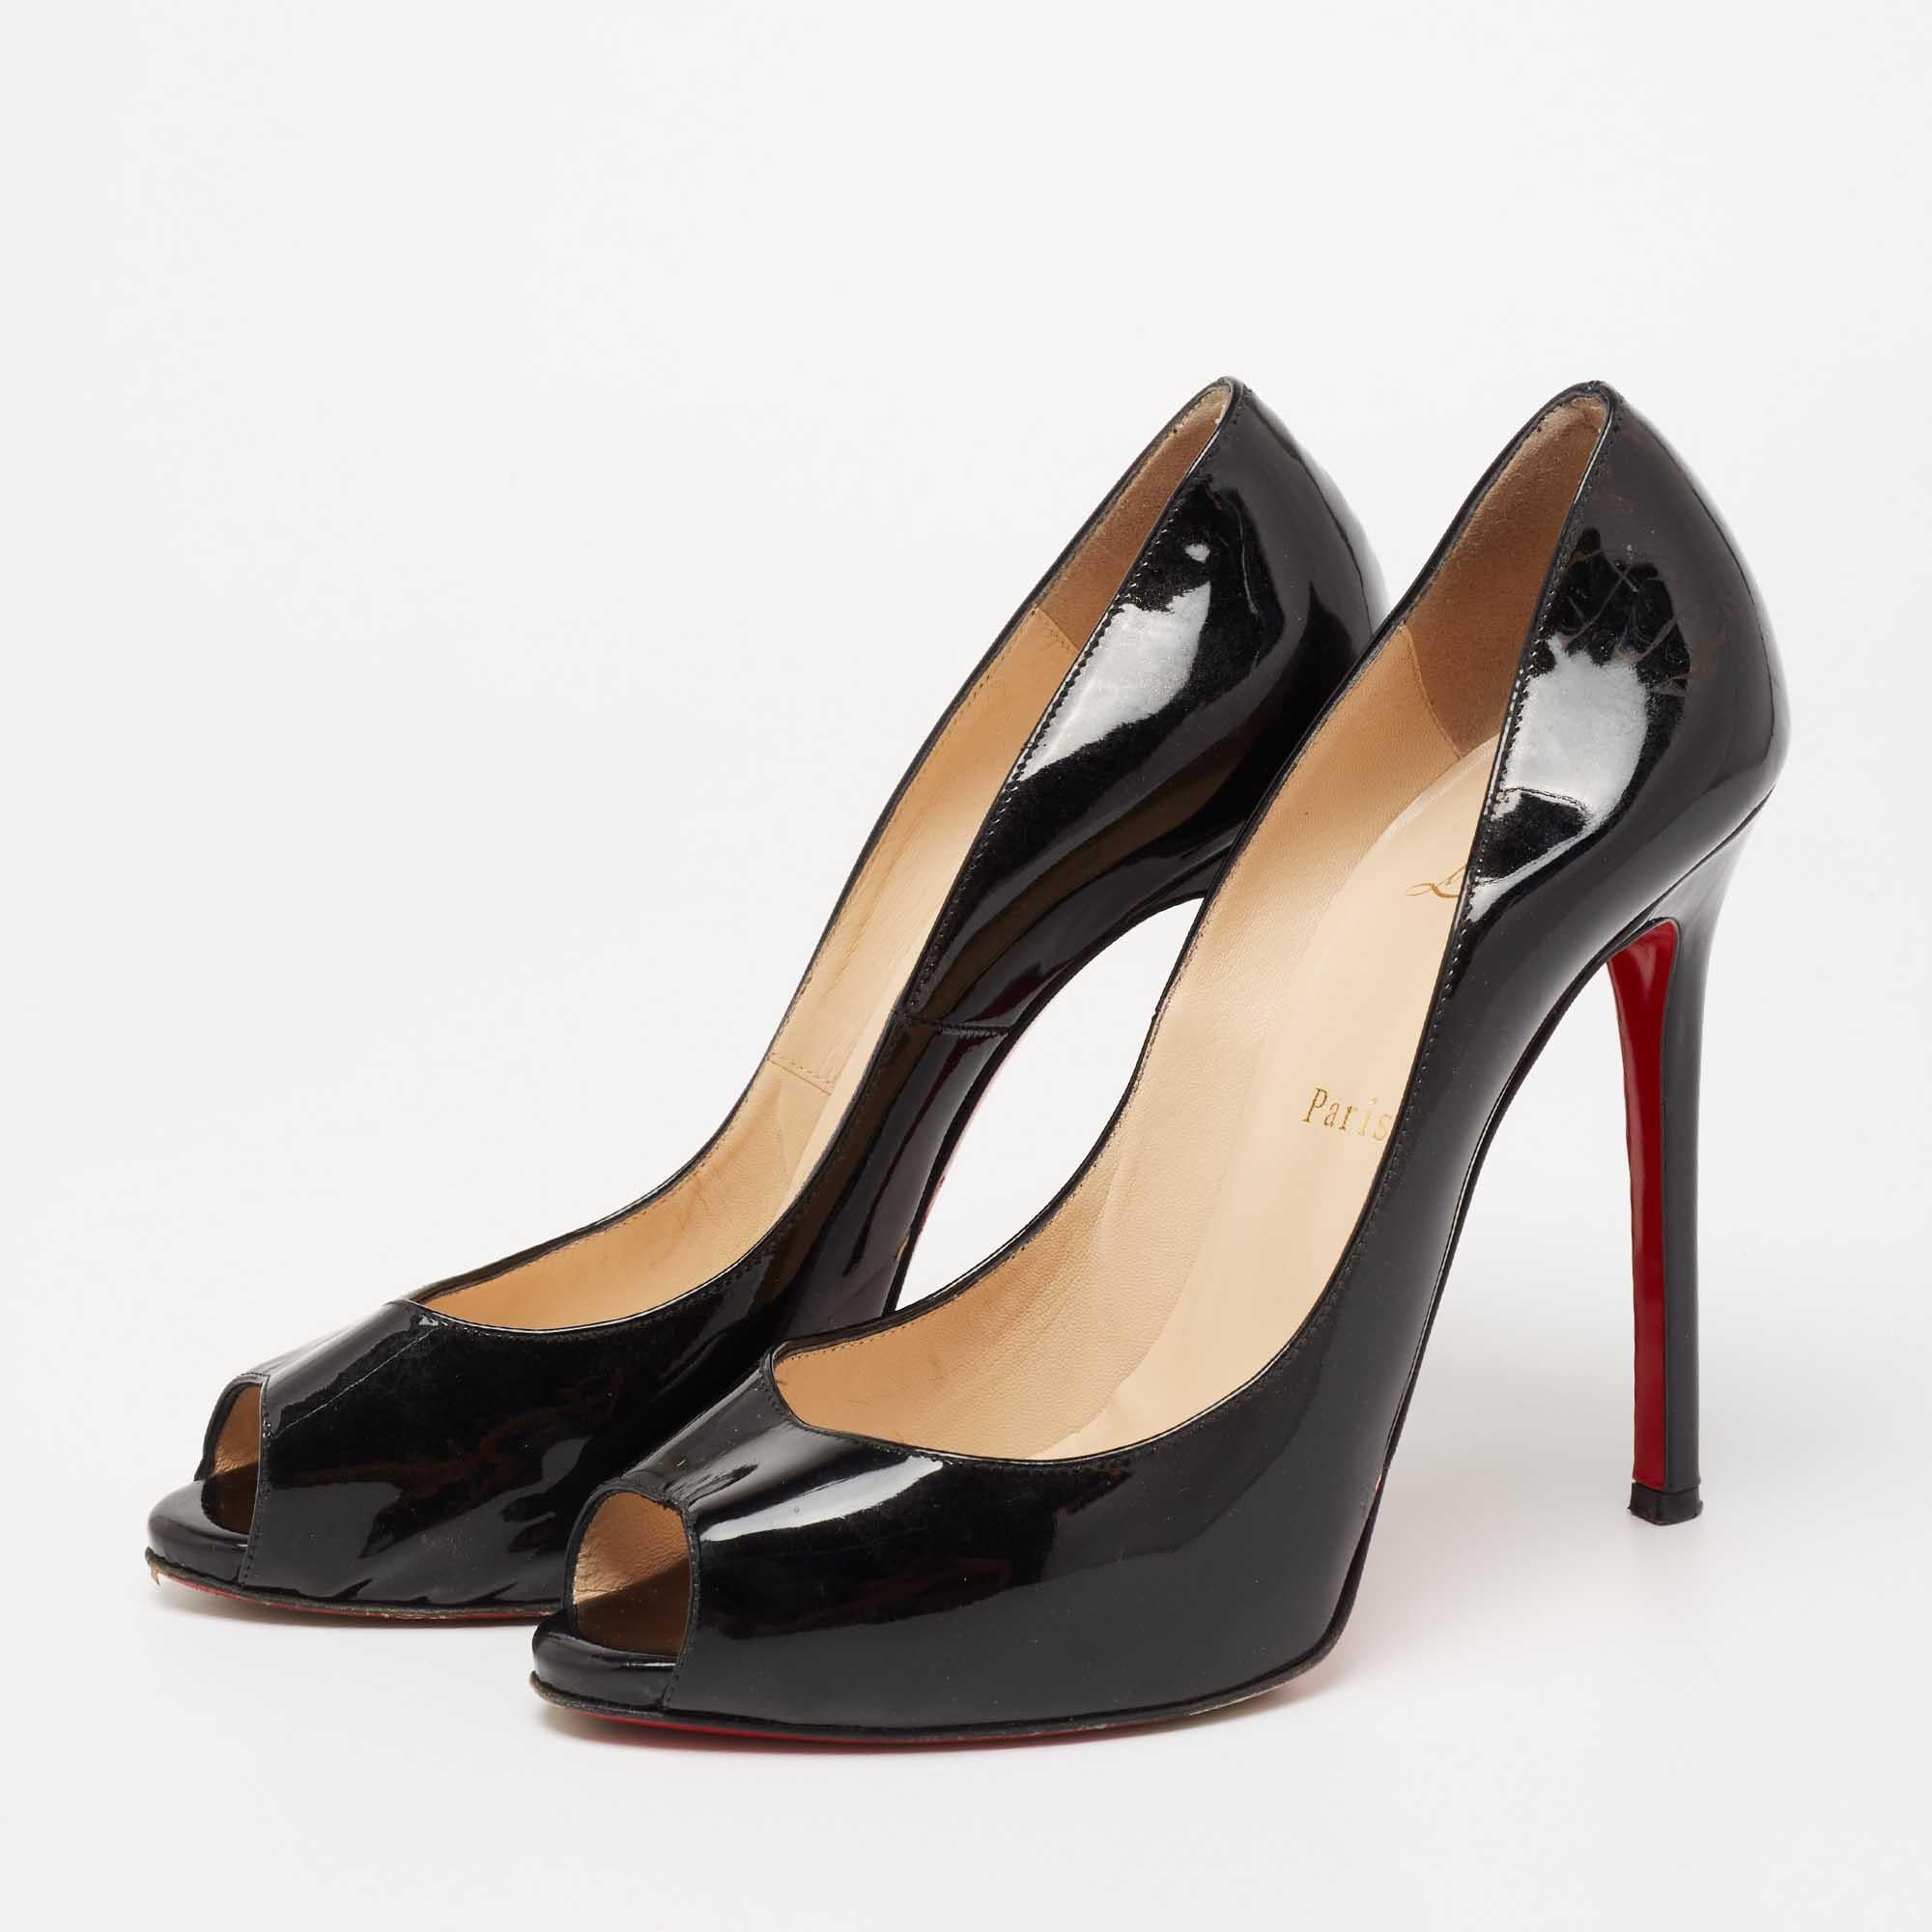 Upgrade your look by adding these Christian Louboutin Flo pumps to the wardrobe. They are crafted from patent leather and designed with peep toes and 12 cm stiletto heels. Finesse and elegance will come naturally to your attire when you wear these